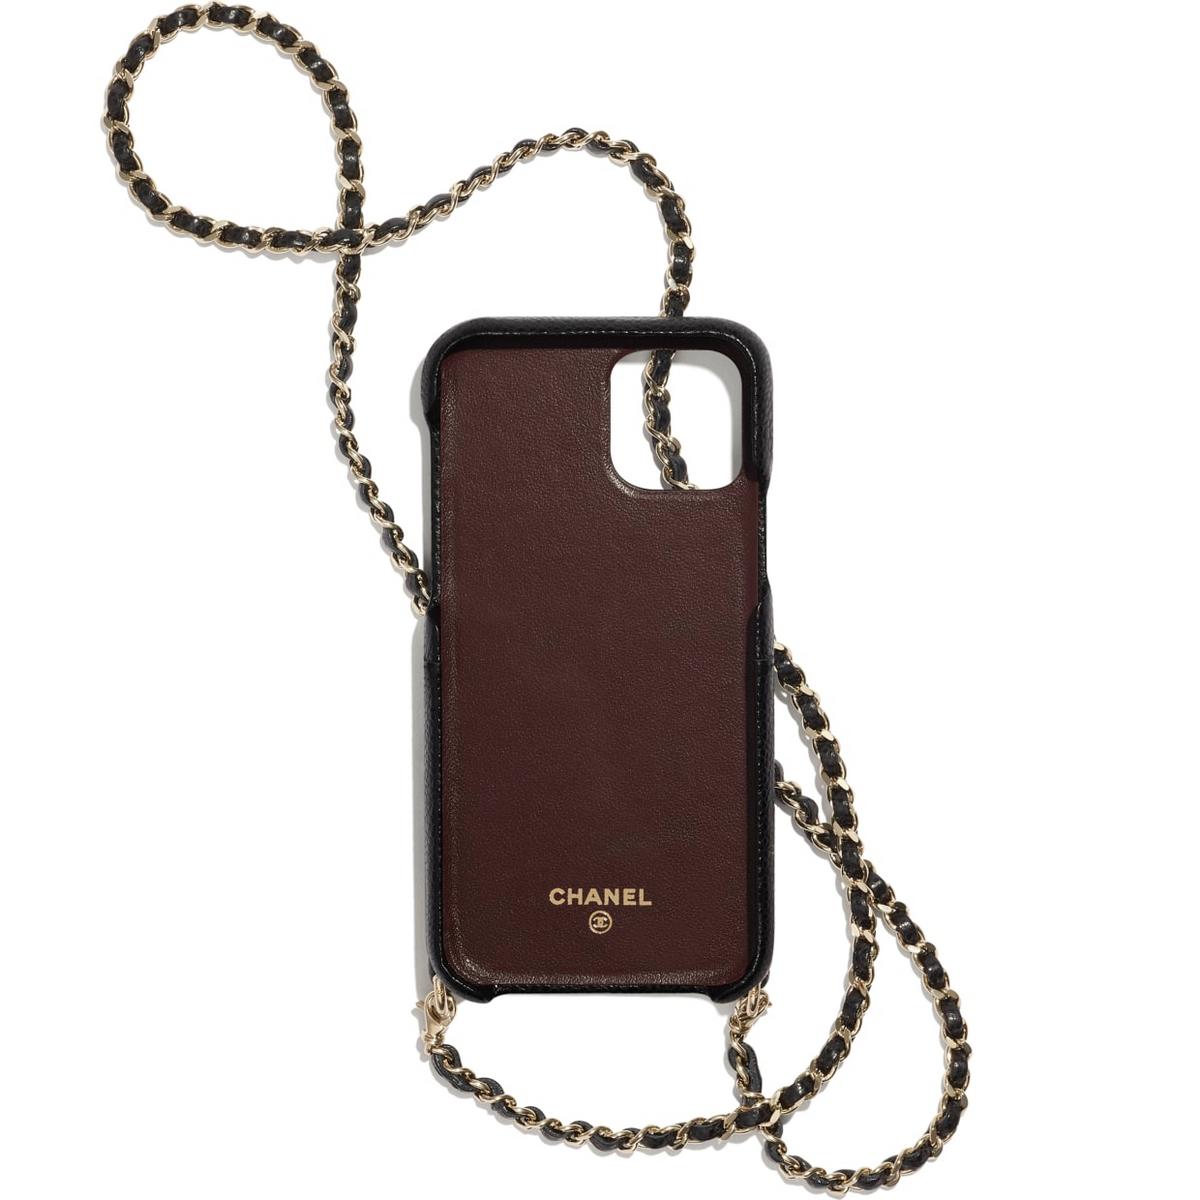 Chanel makes iPhone cases that start at $1,000 and you will love them